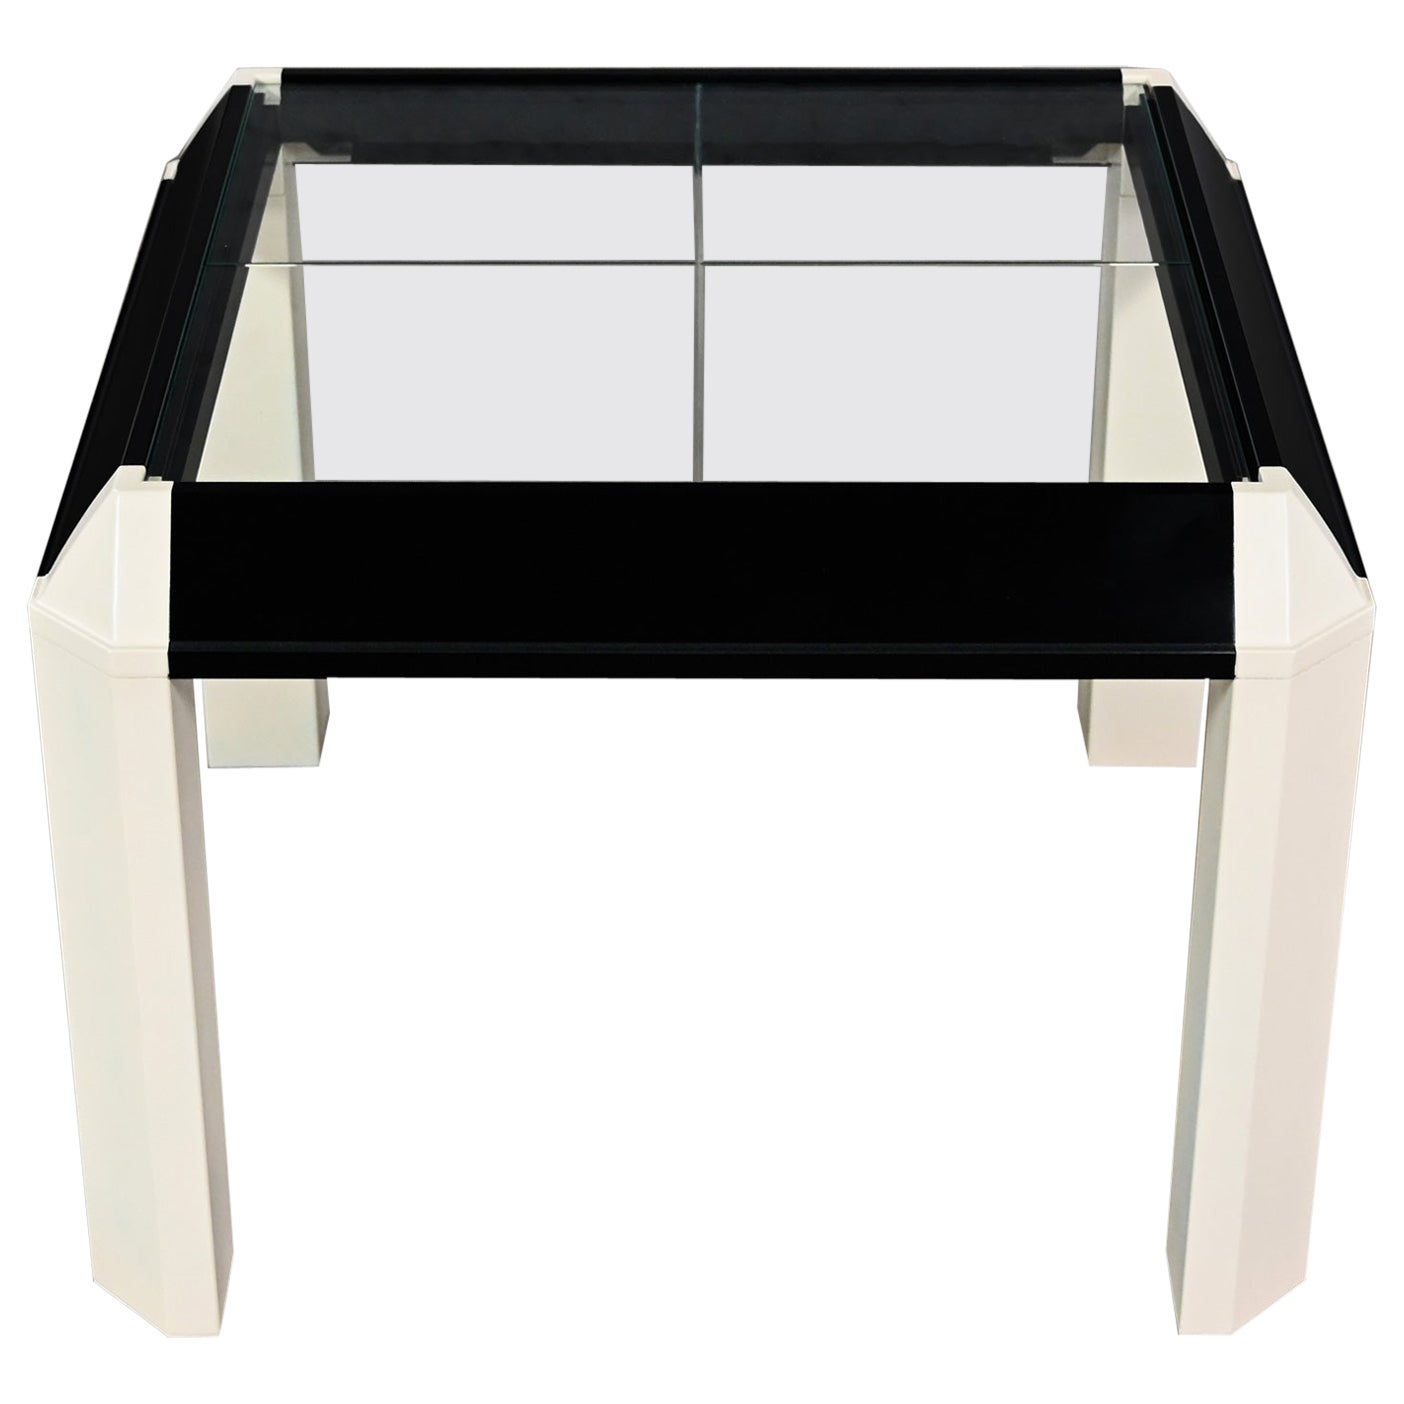 Postmodern End Table Black Painted Frame Off White Trapezoid Legs Glass Top